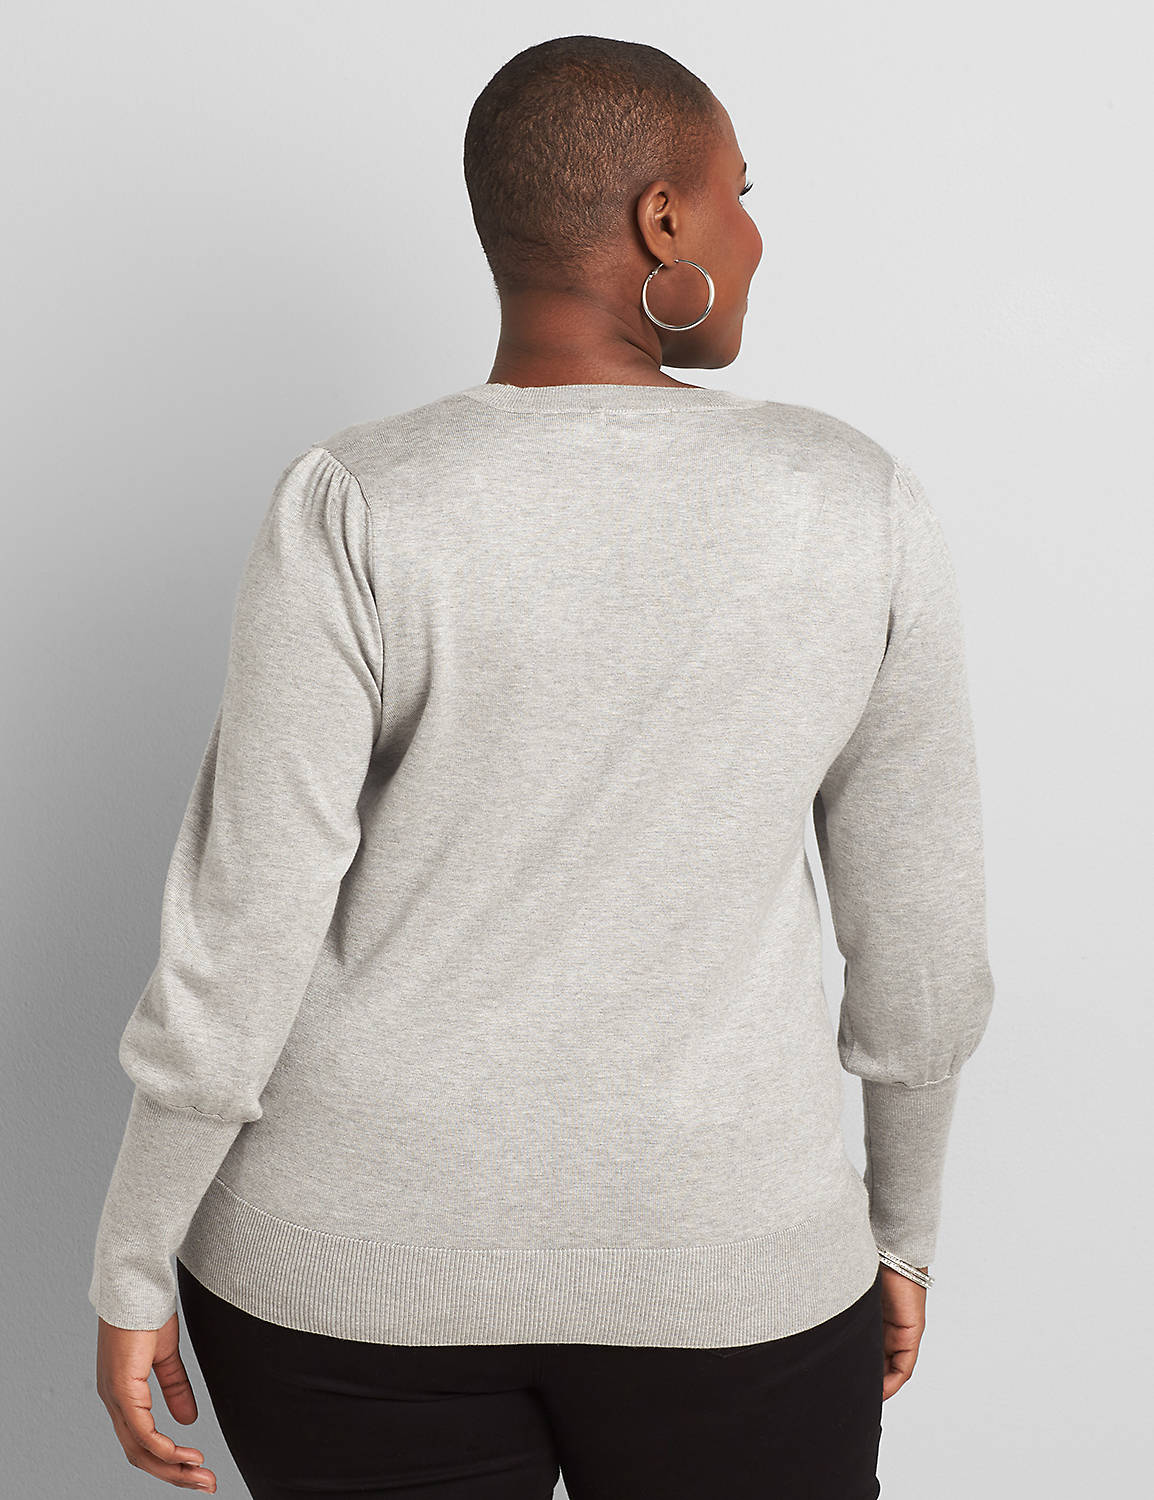 Long Sleeve Square Neck Pullover Sweater 1116861:BC04 Heather grey:18/20 Product Image 2